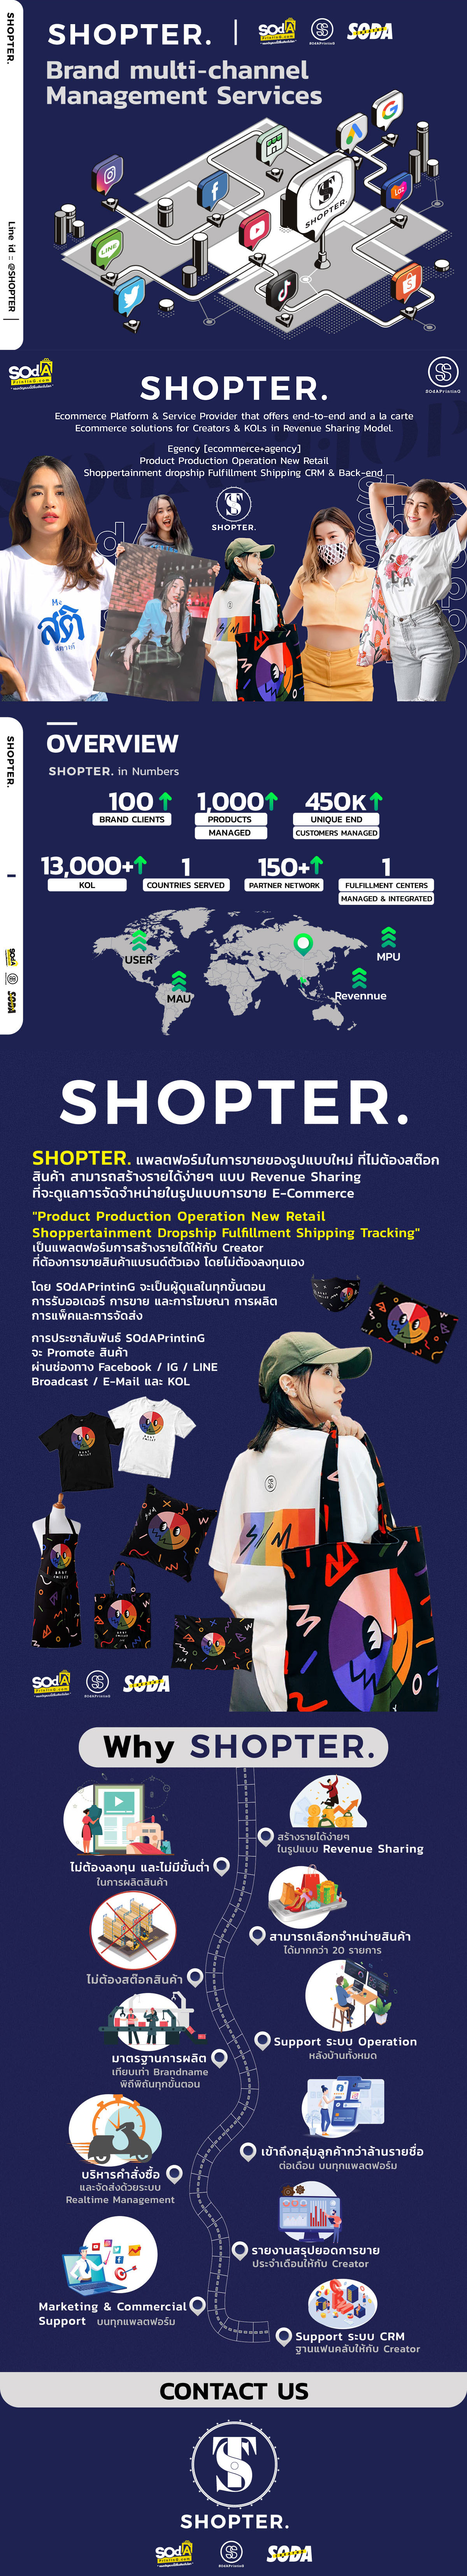 Shopter Brand multi channel management services